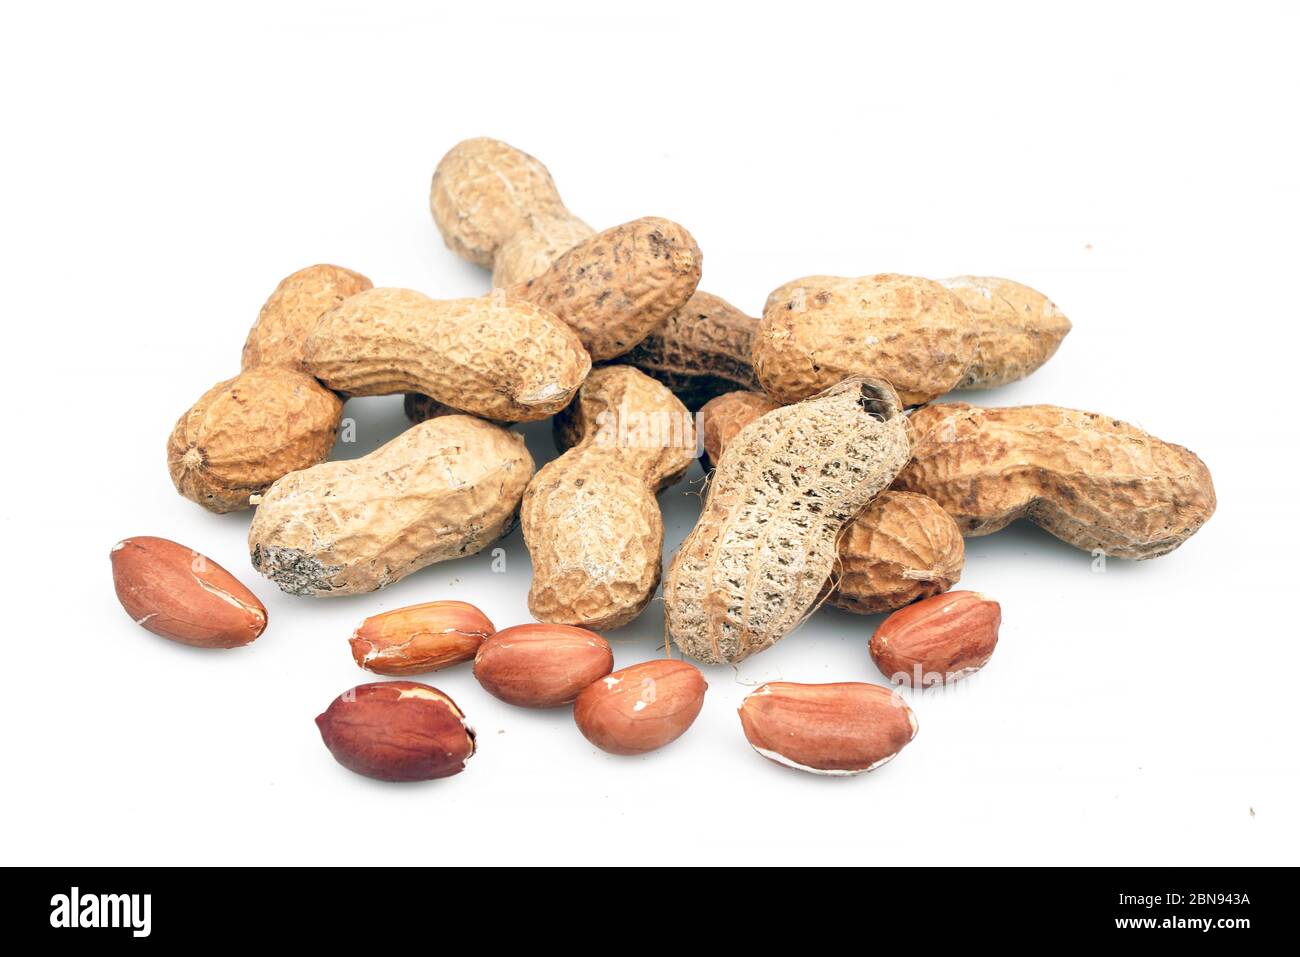 Organic and fresh Shelled and unshelled peanuts. Top view Stock Photo